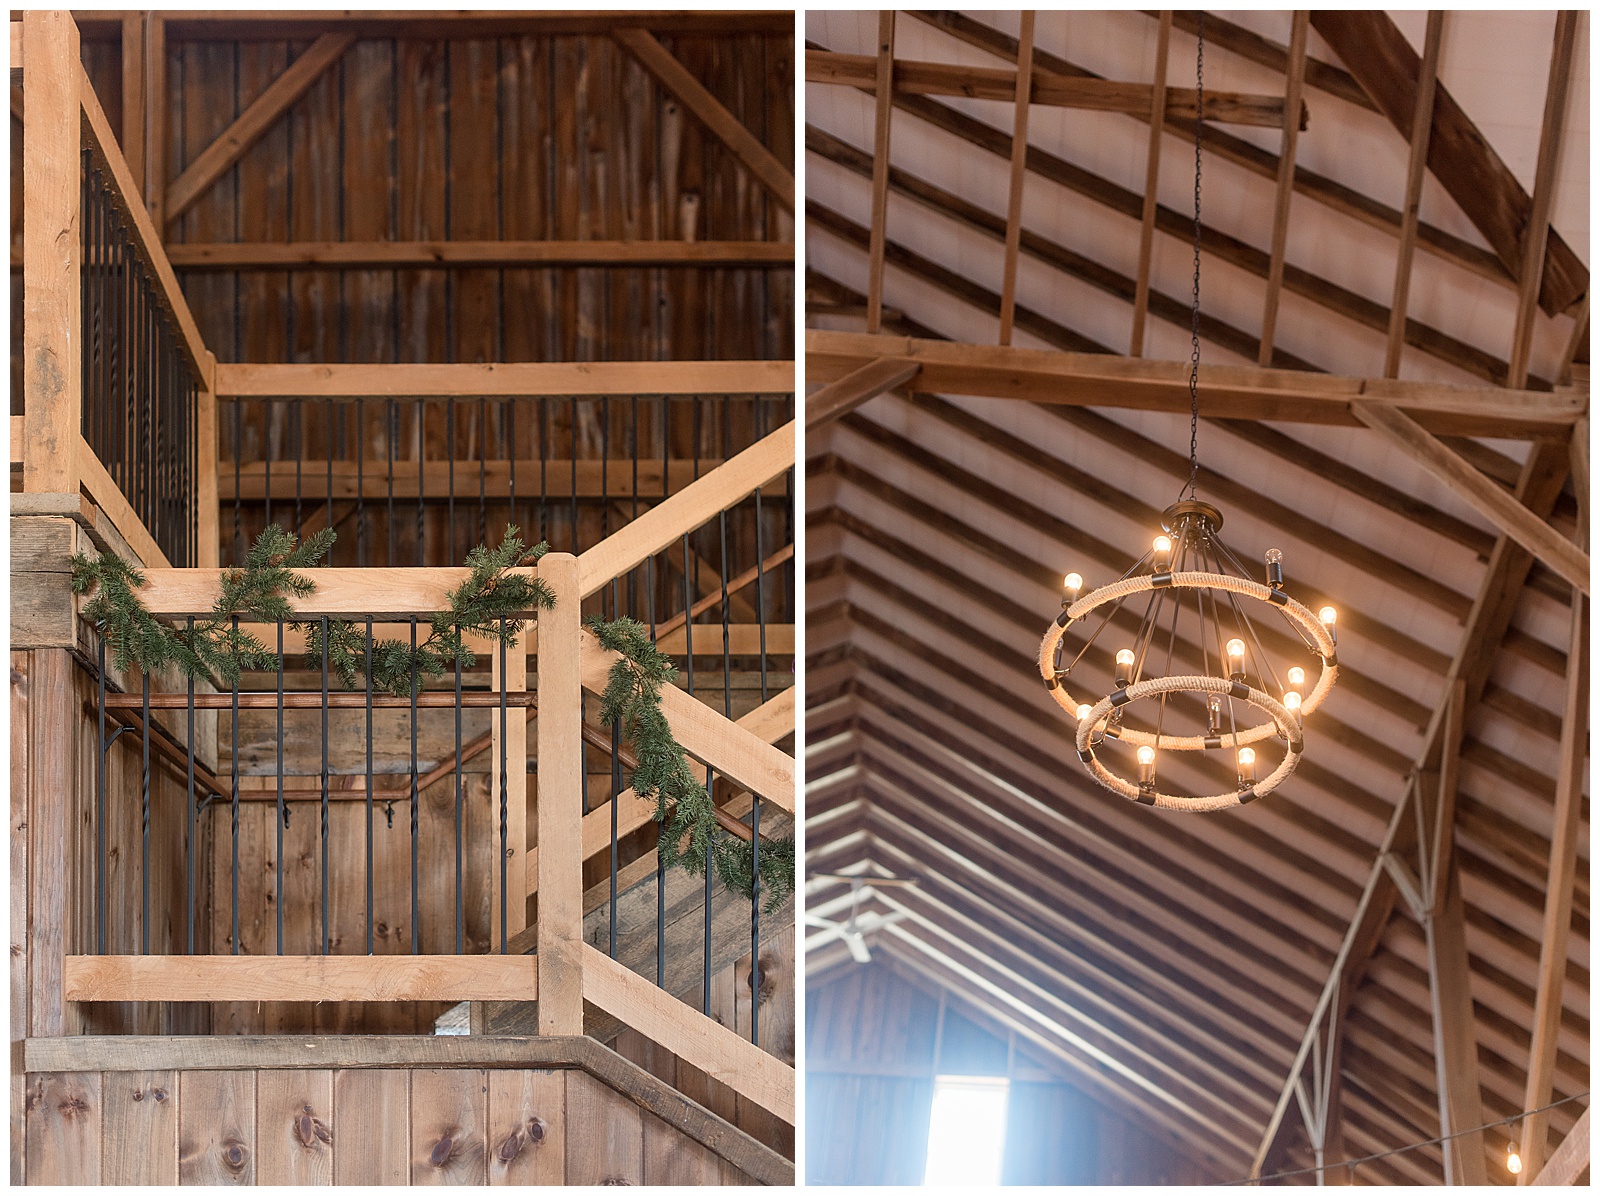 interior close up photo of wooden and black wrought iron staircase inside barn reception venue with greenery strung around handrail and exposed beams of the ceiling at The Barn at Stoneybrooke in Atglen, PA, close up photo of chandelier hanging from ceiling of exposed wooden beams with sunlight shining through small window in background at The Barn at Stoneybrooke in Atglen, PA